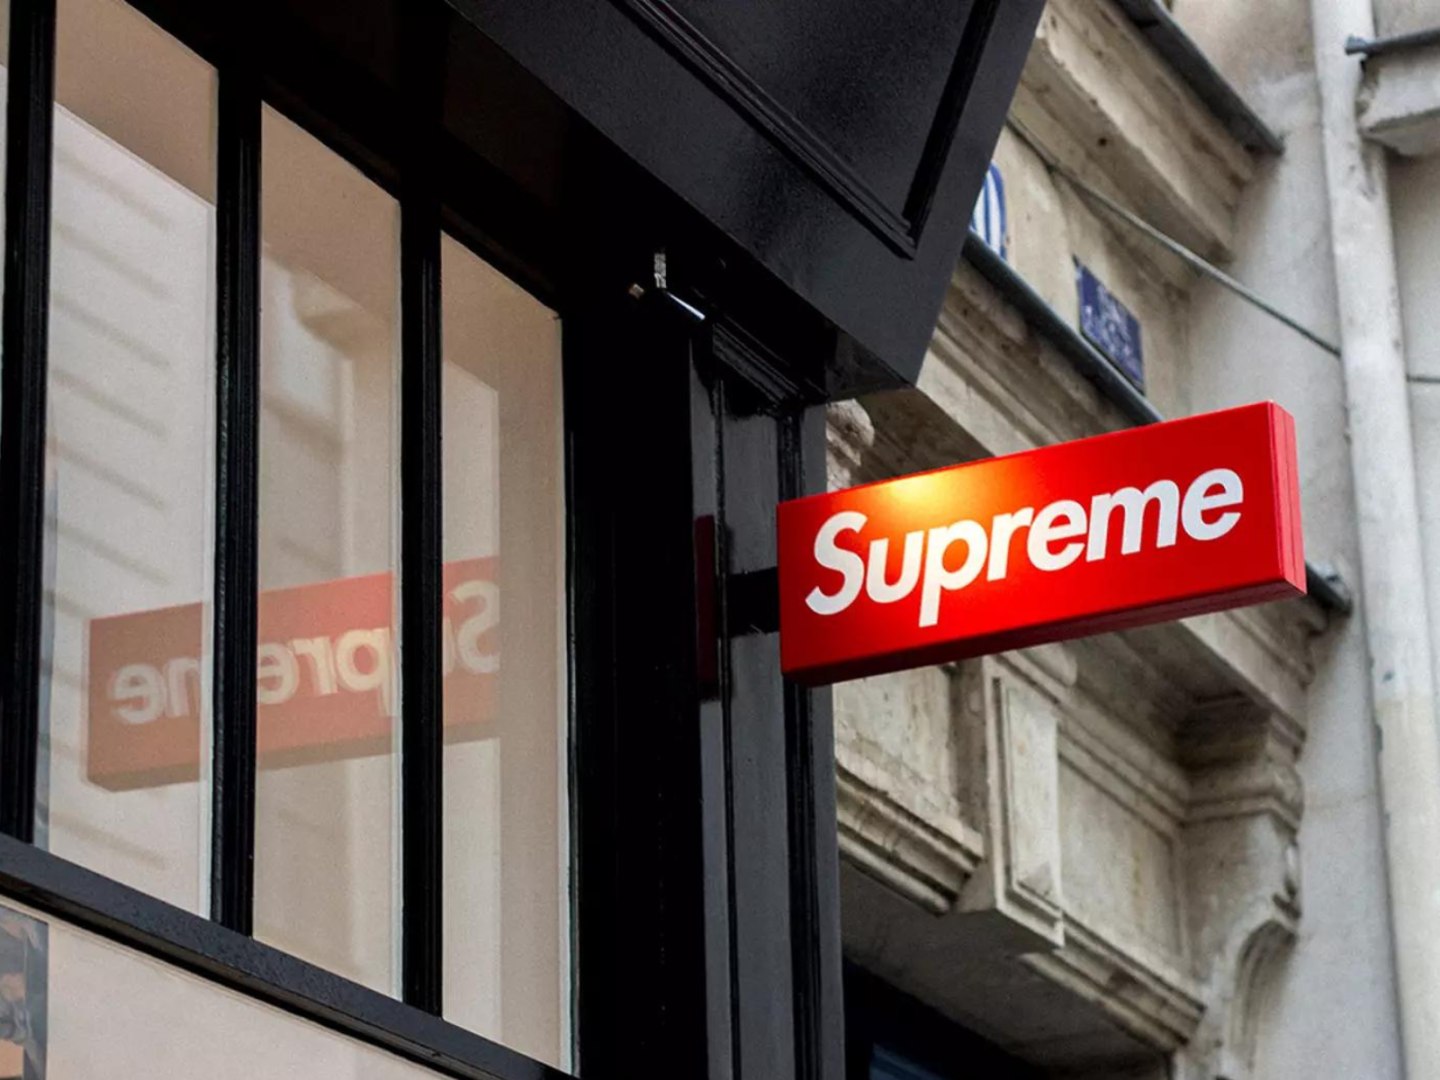 Supreme: selling out to Gen Z hypebeasts